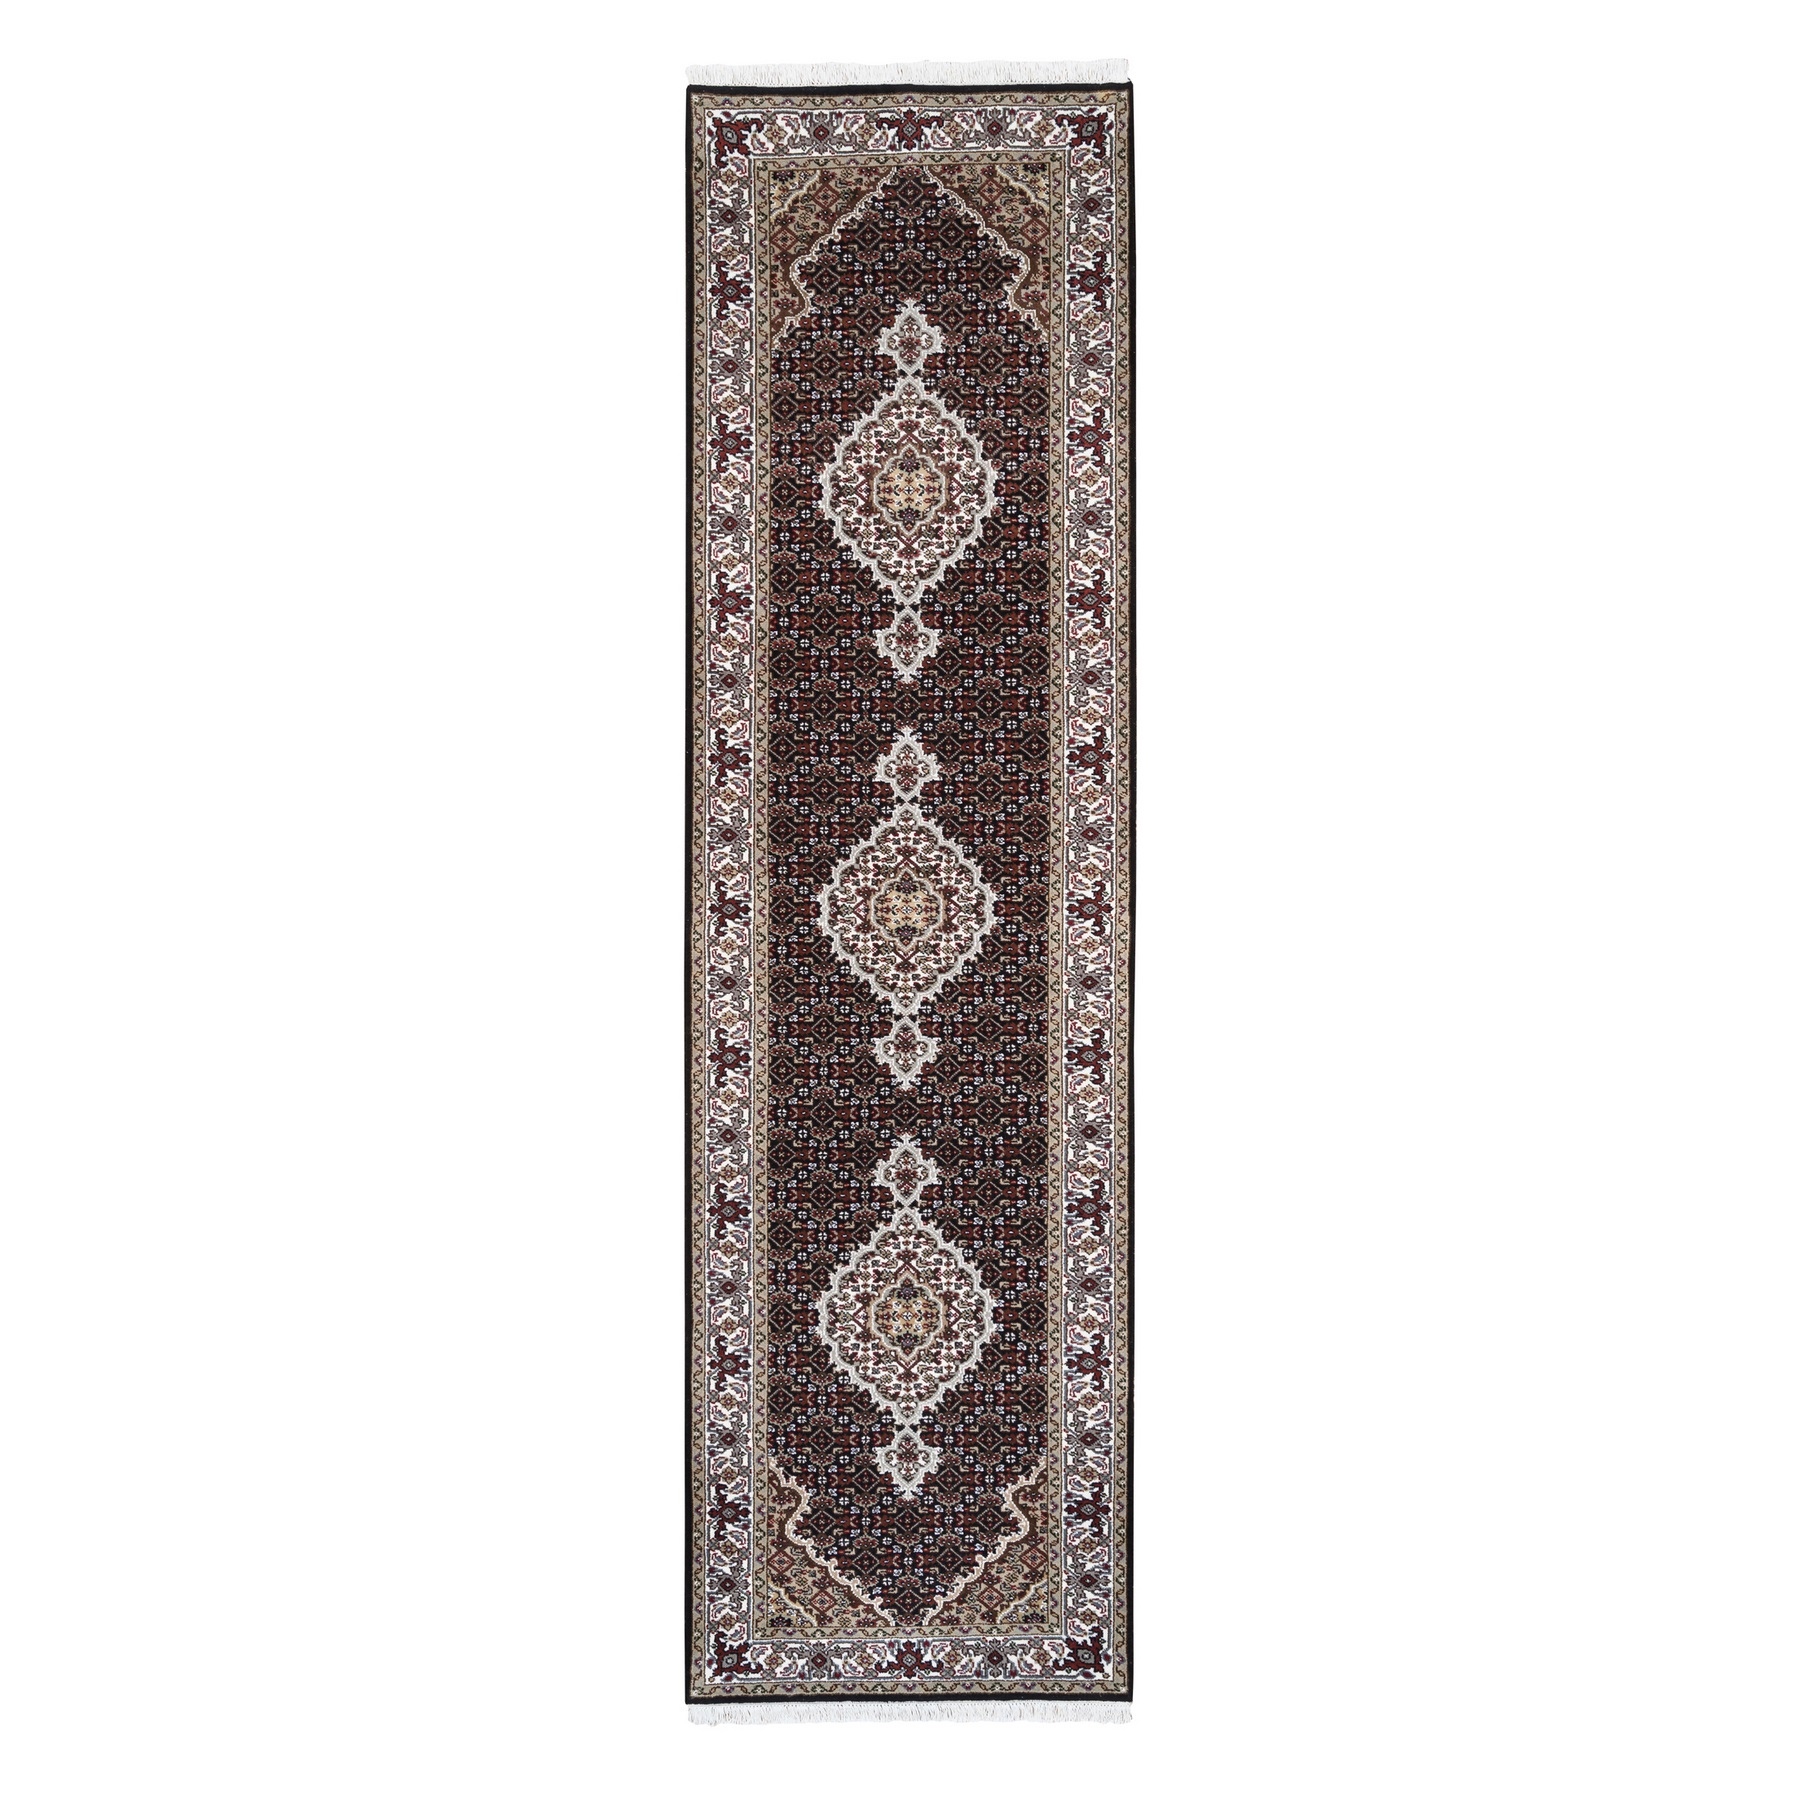 Pirniakan Collection Hand Knotted Black Rug No: 1125162